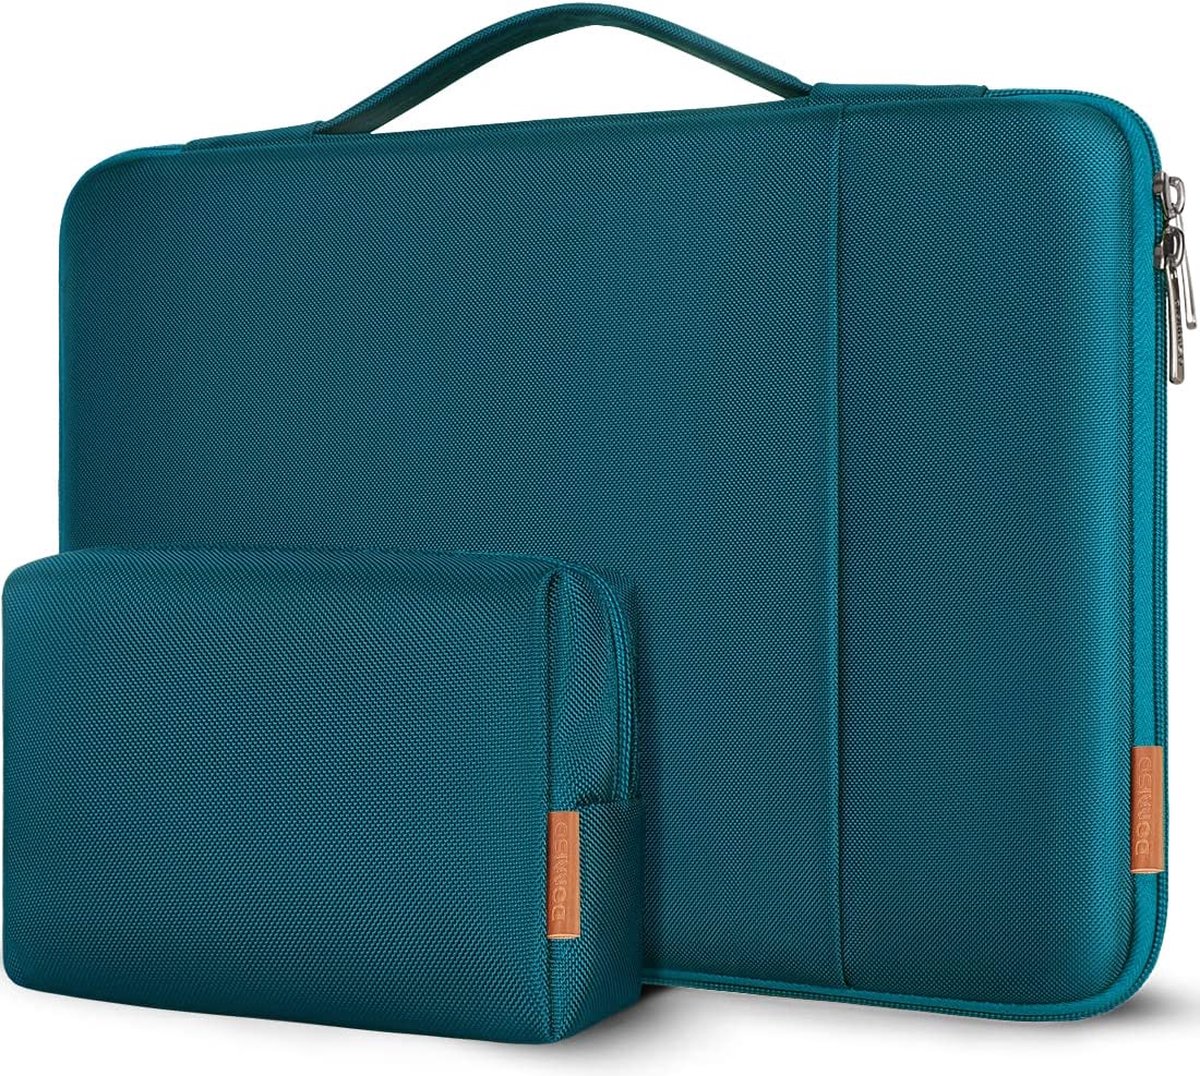 Laptoptas, 17 inch hoes, stootvast, waterdichte laptopsleeve, PC case, notebookbeschermhoes voor 17,3 inch HP Pavilion 17 Envy 17/Dell Inspiron 17/Lenovo IdeaPad/LG Gram/Acer/MSI/ASUS, turquoise